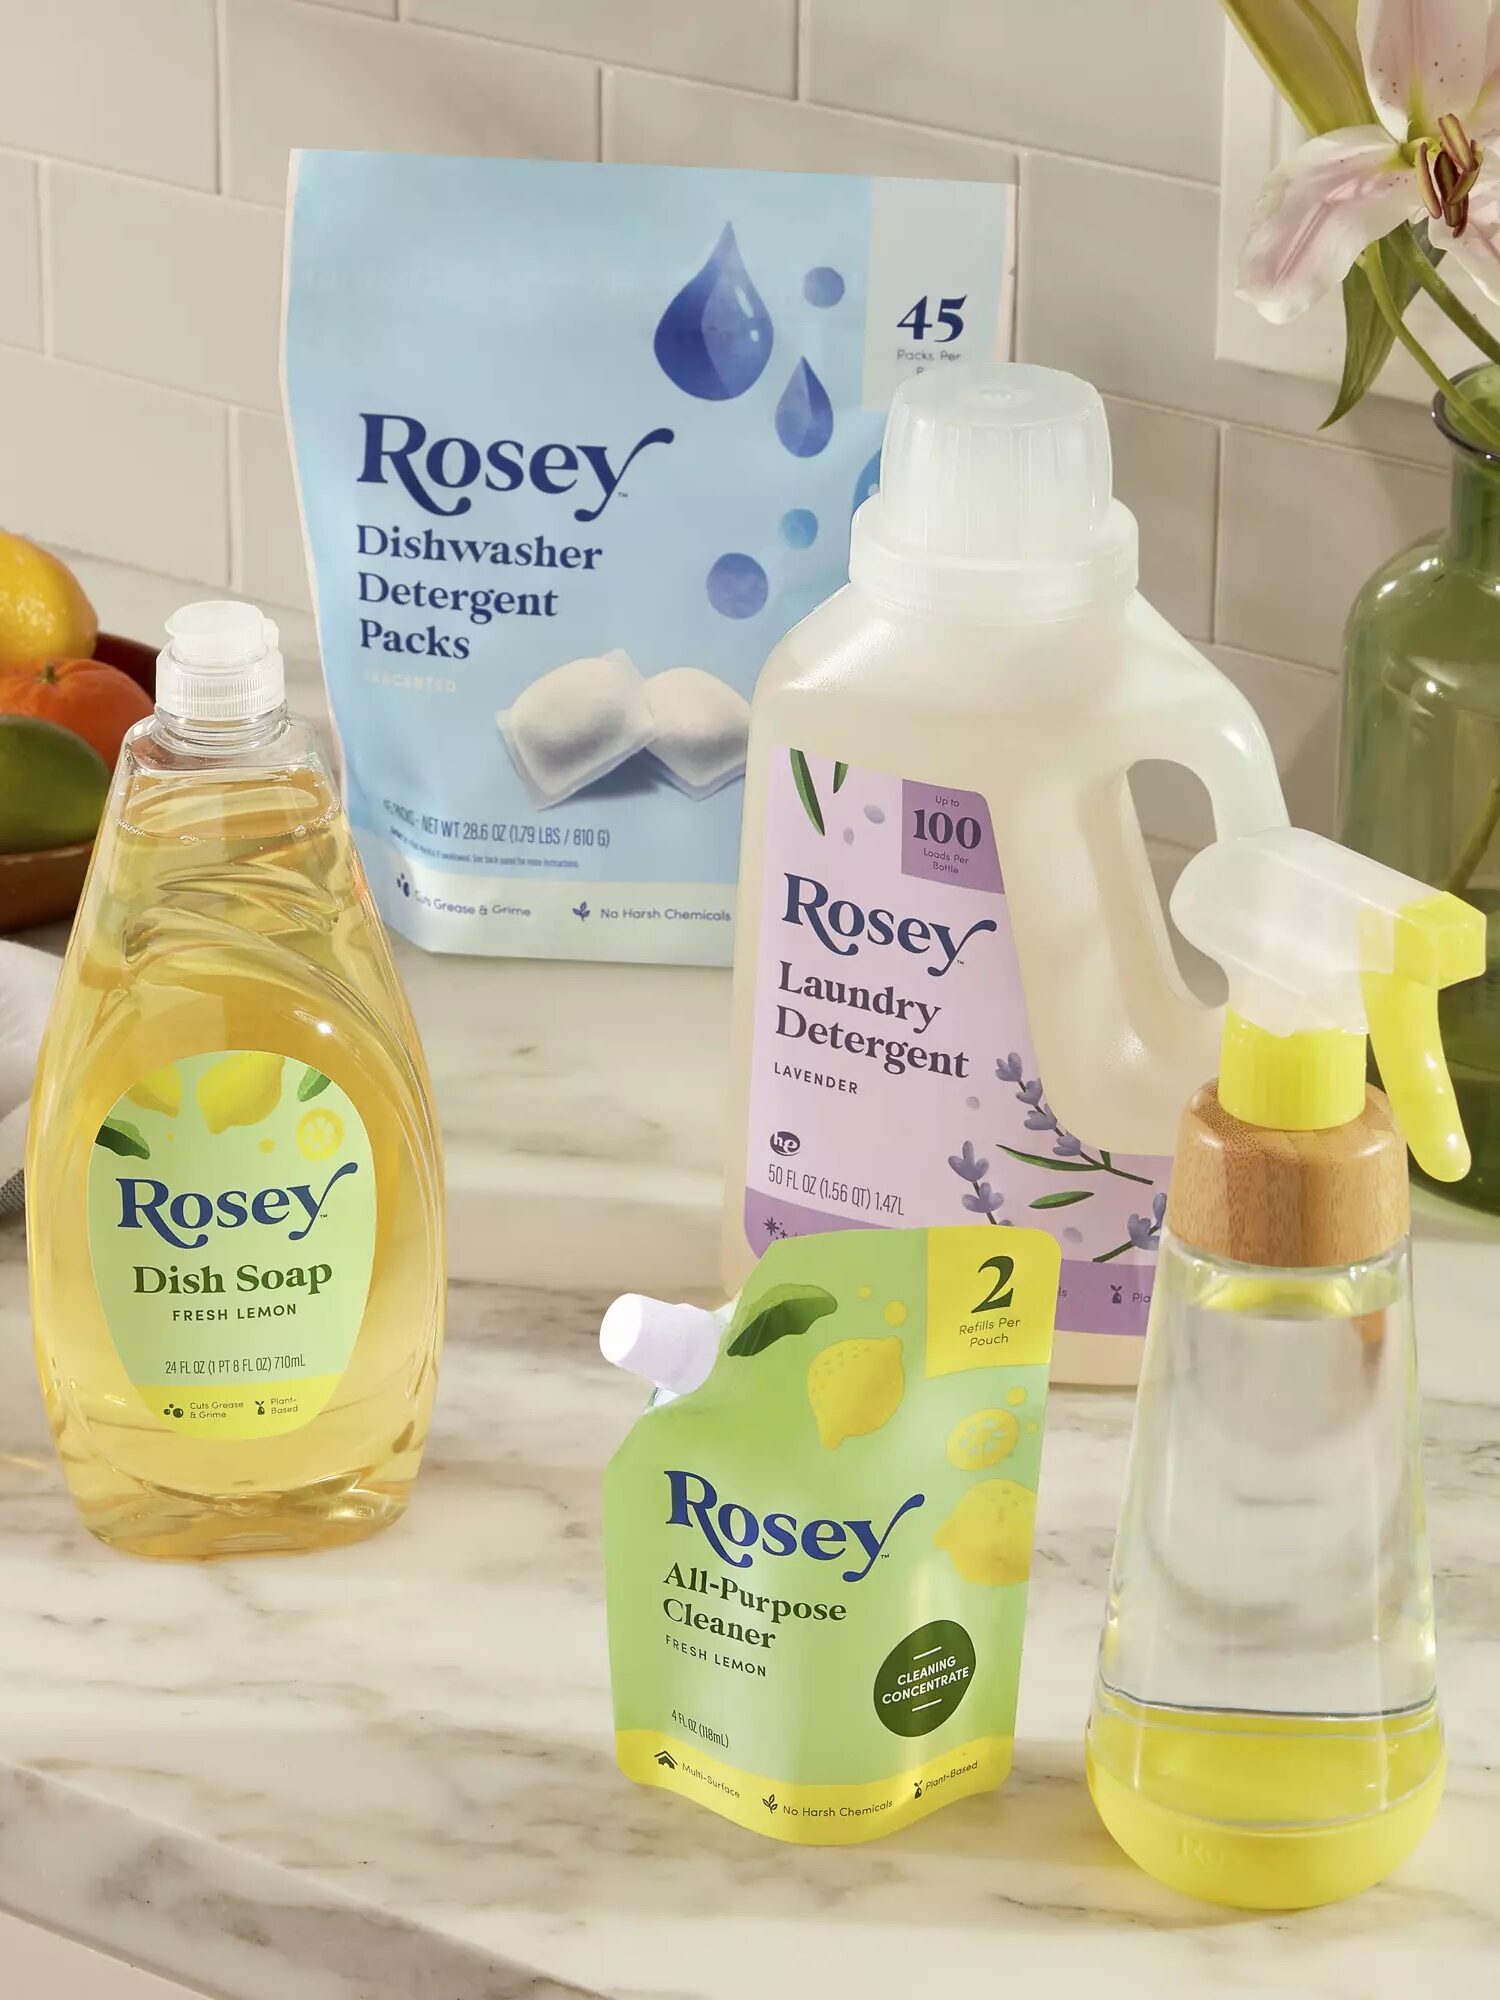 A collection of household cleaning products on a kitchen counter, including dish soap, dishwasher detergent packs, laundry detergent, and all-purpose cleaner.